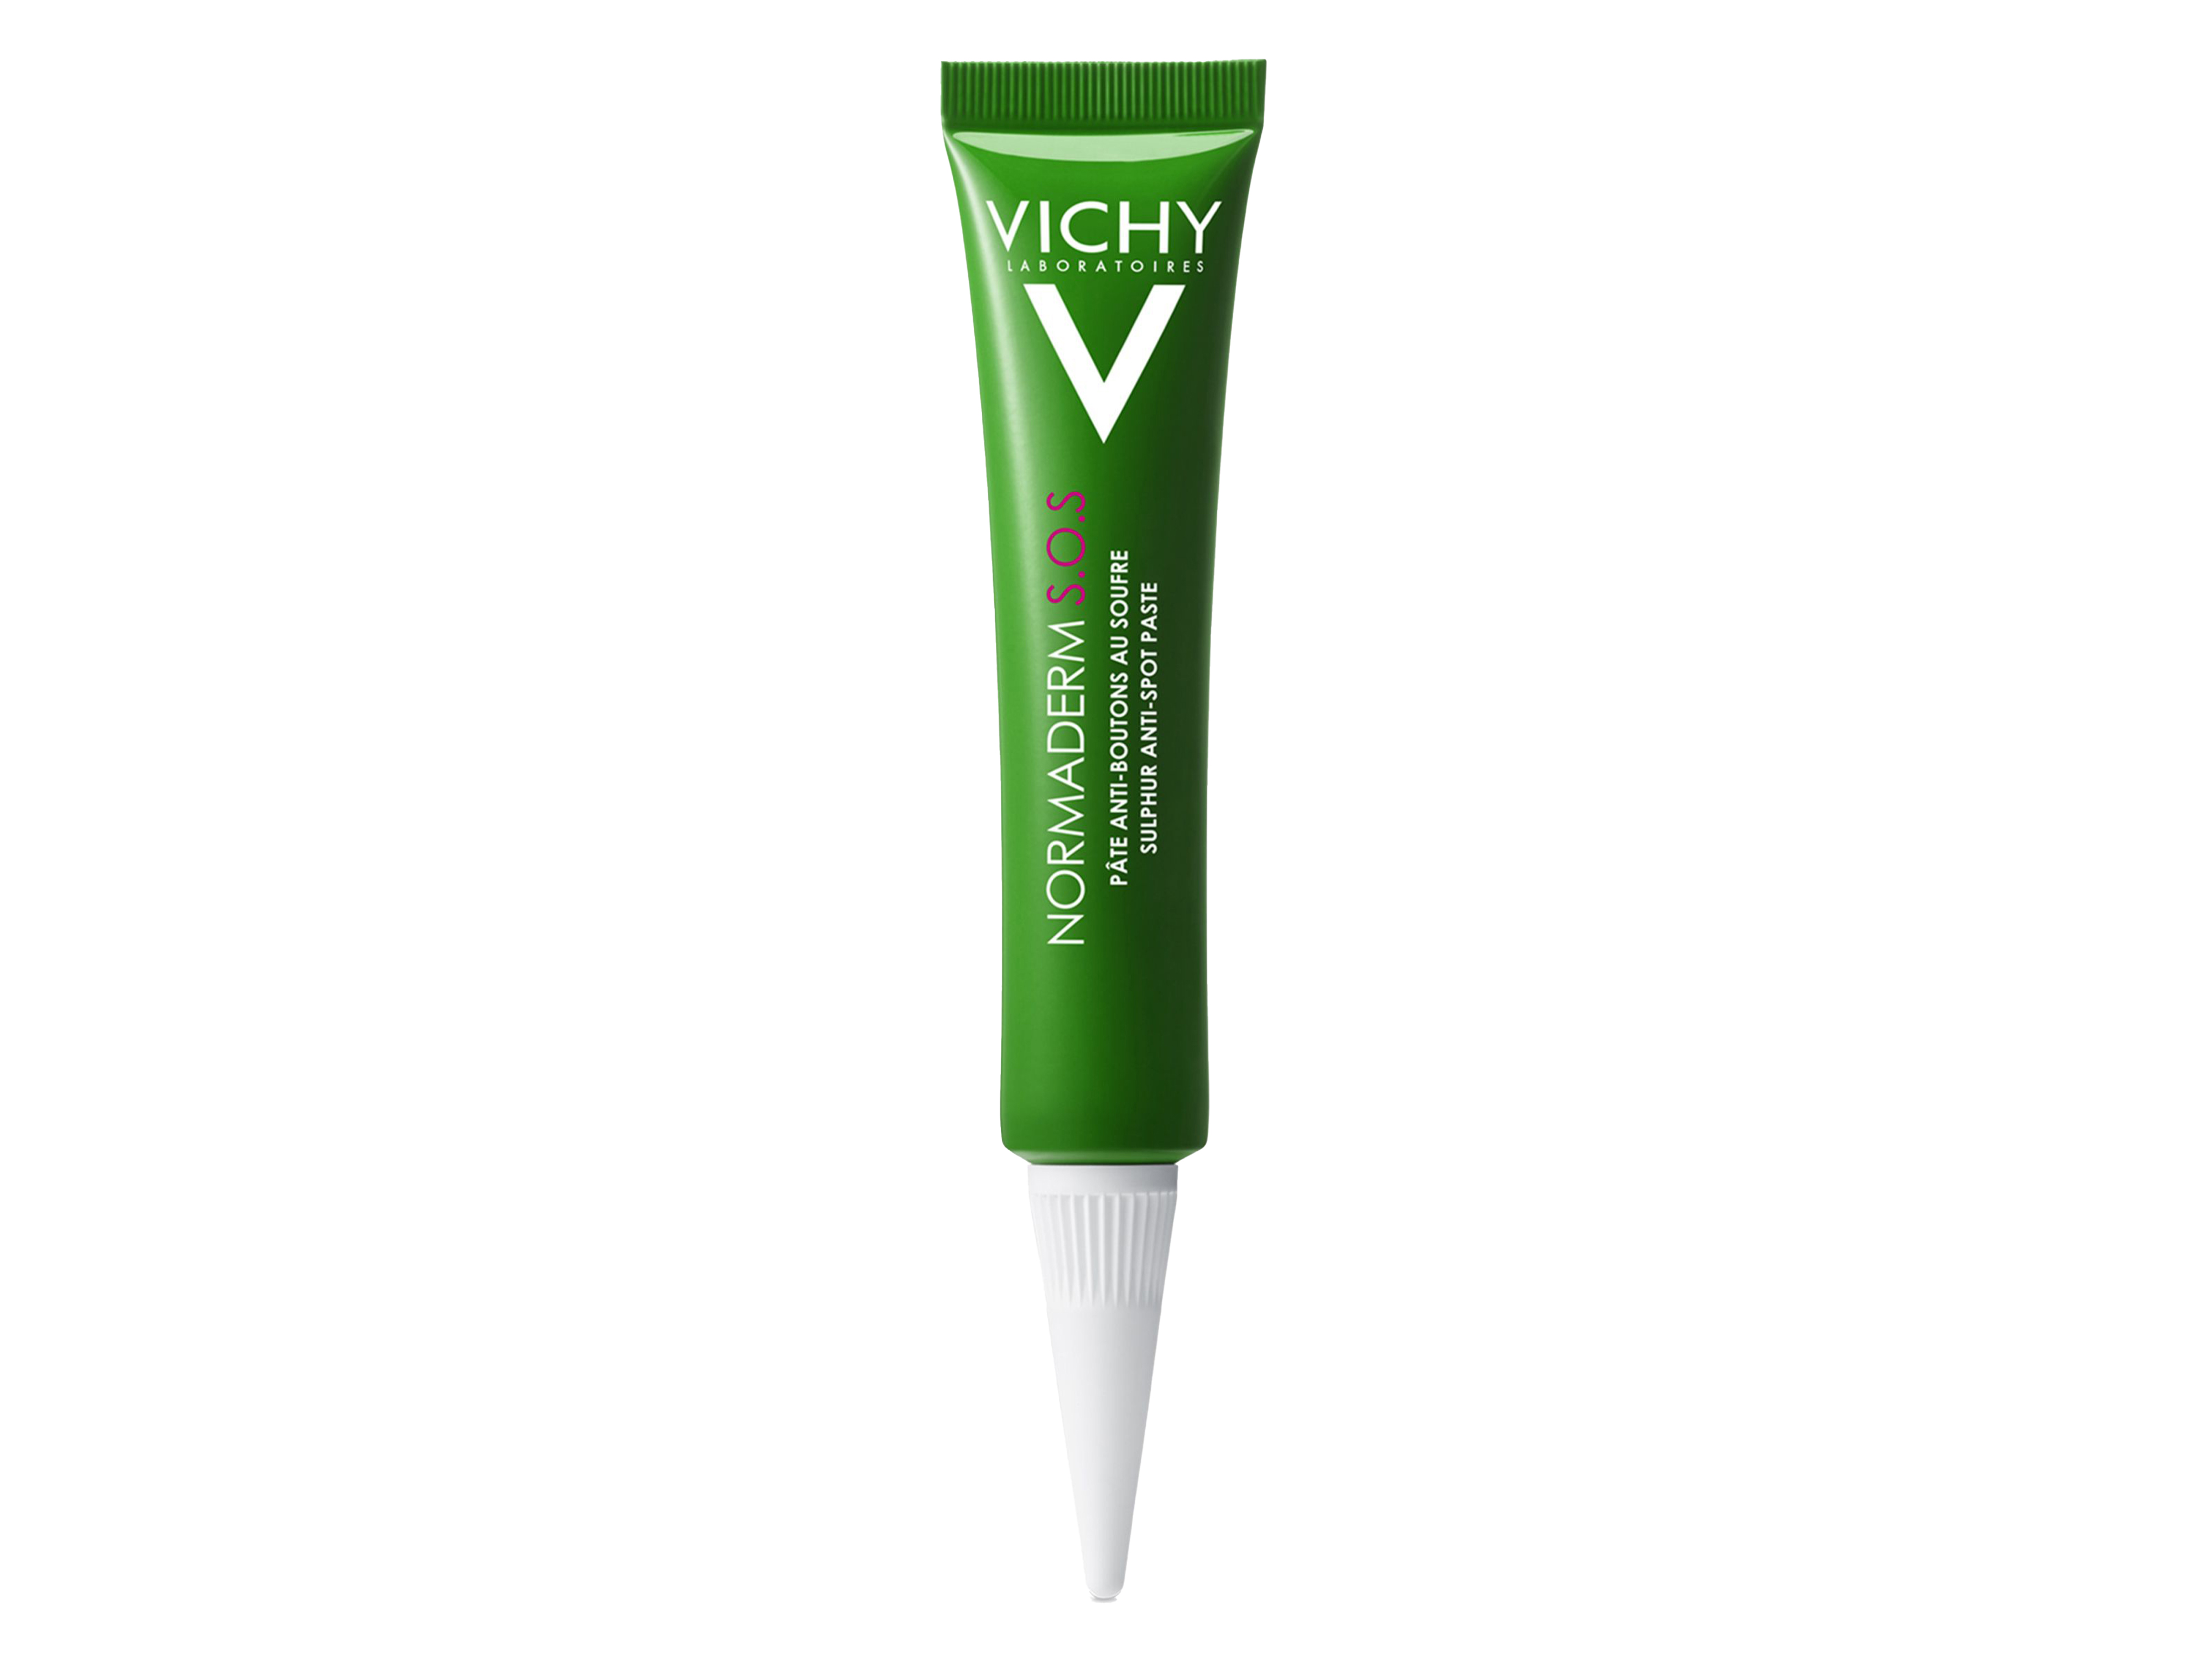 Vichy Normaderm S.O.S Anti-Spot Paste, 20 ml